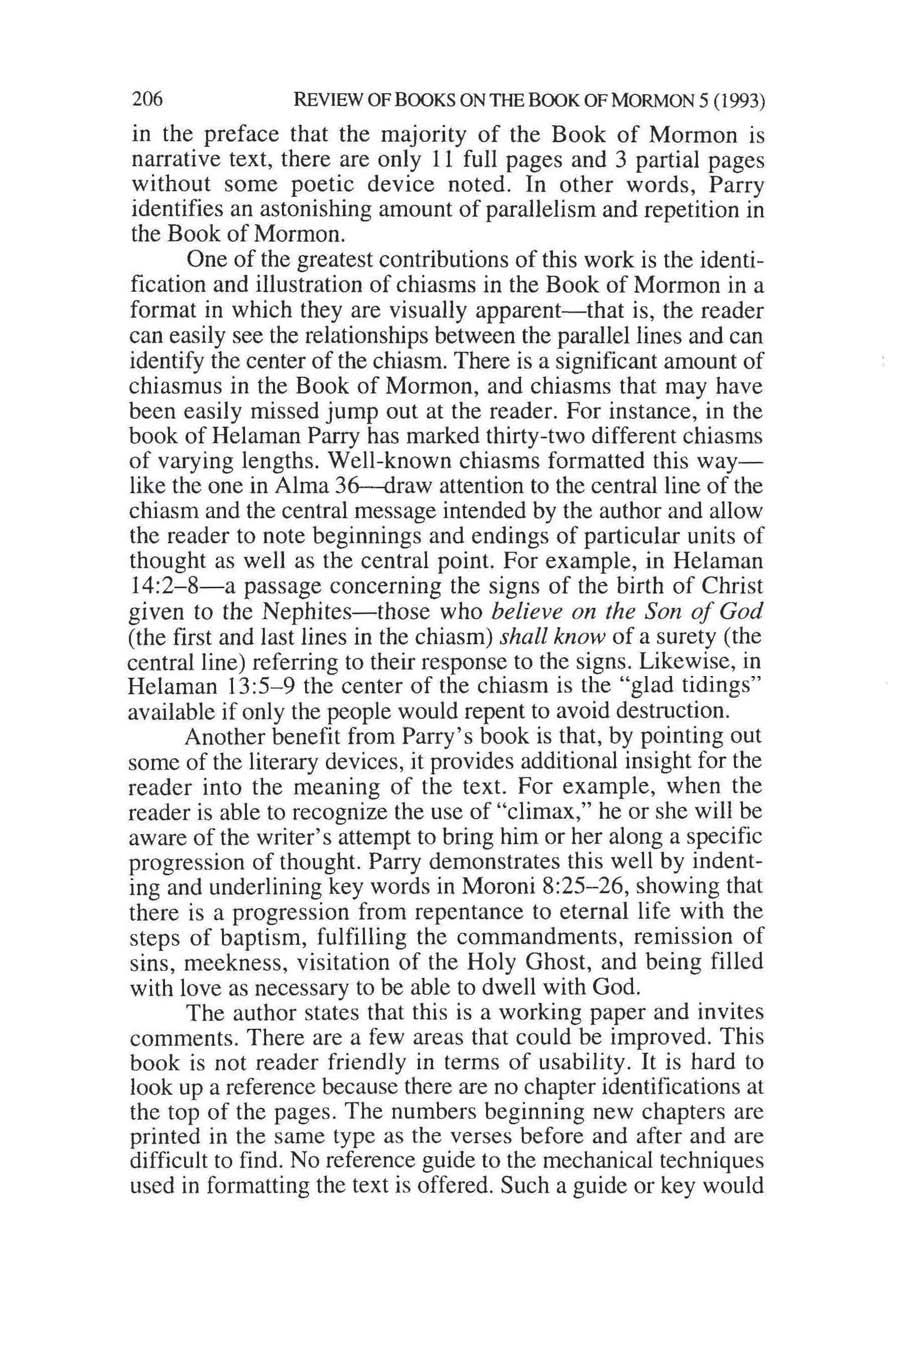 206 REVIEW OF BOOKS ON THE BOOK OF MORMON 5 (1993) in the preface thal the majority of Lhe Book of Mormon is narrative text, there are only 11 full pages and 3 partial pages without some poetic